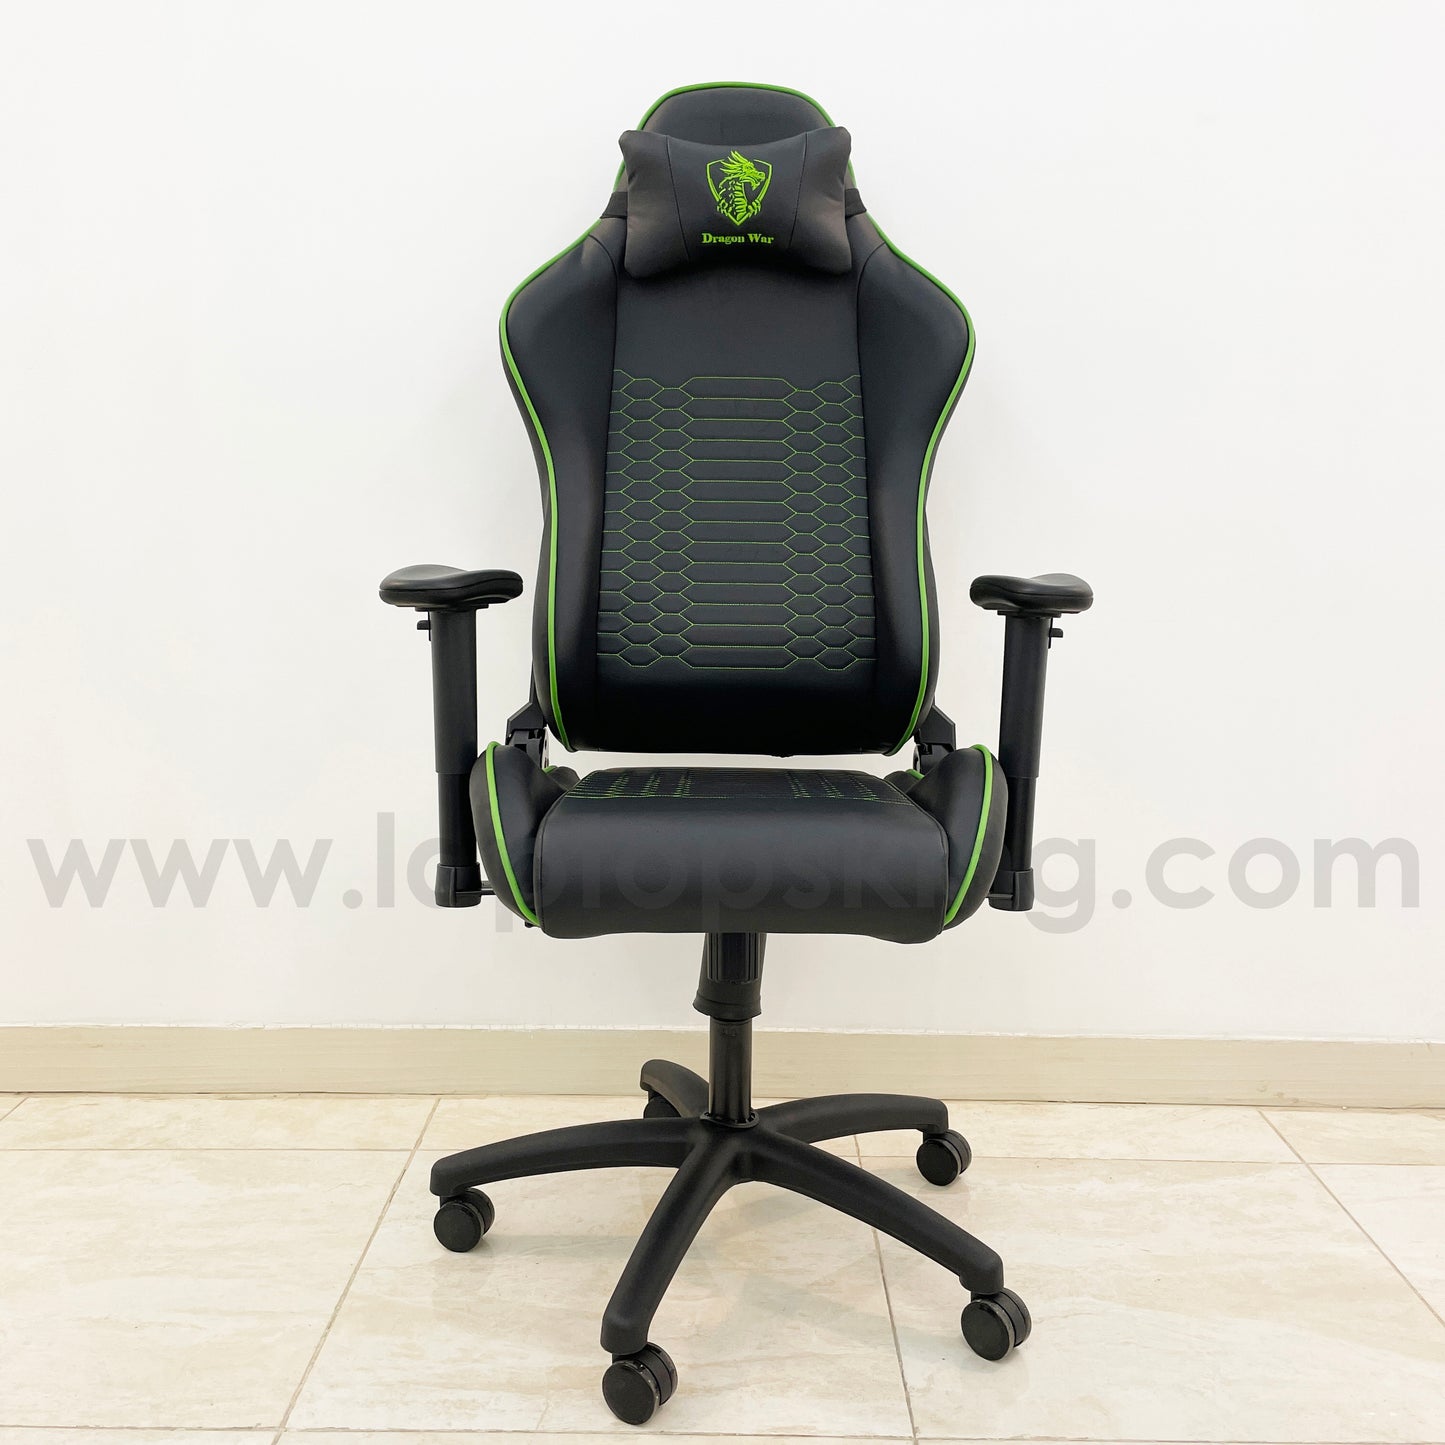 Dragon War DK-867 Green Edition High Quality Gaming Chair Offer (Brand New)